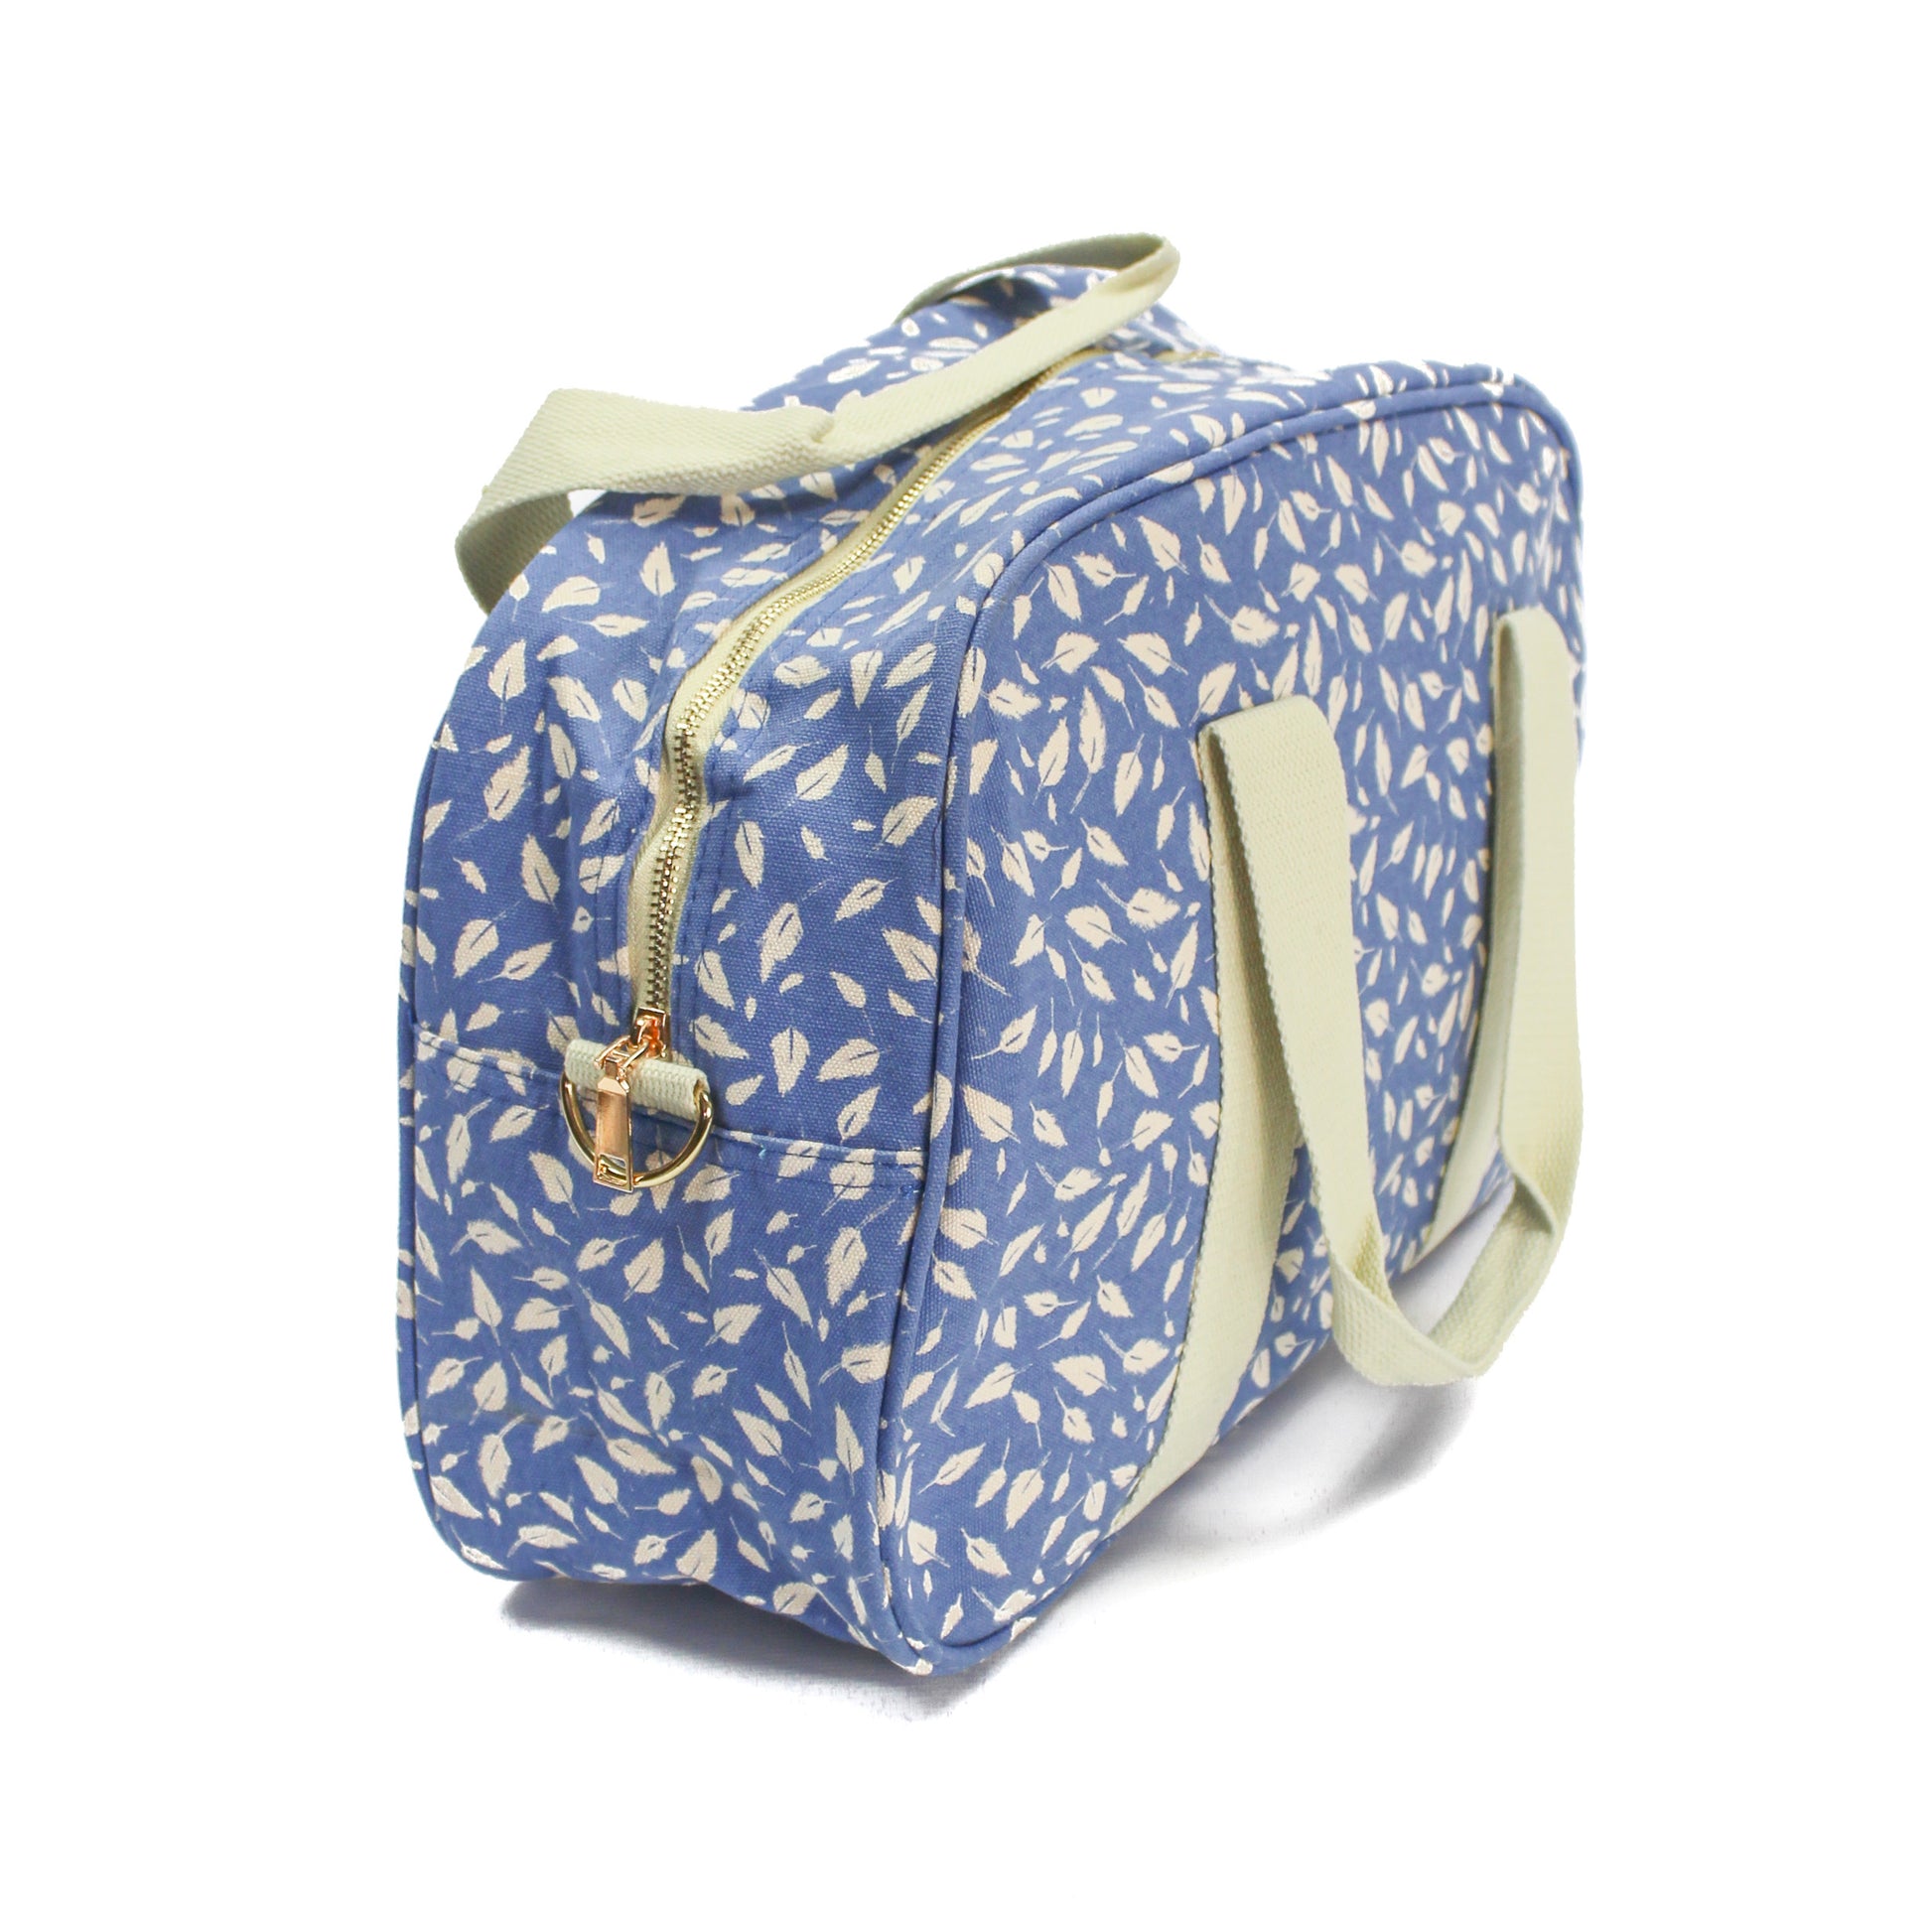 Overnight bag in blue and white leaves